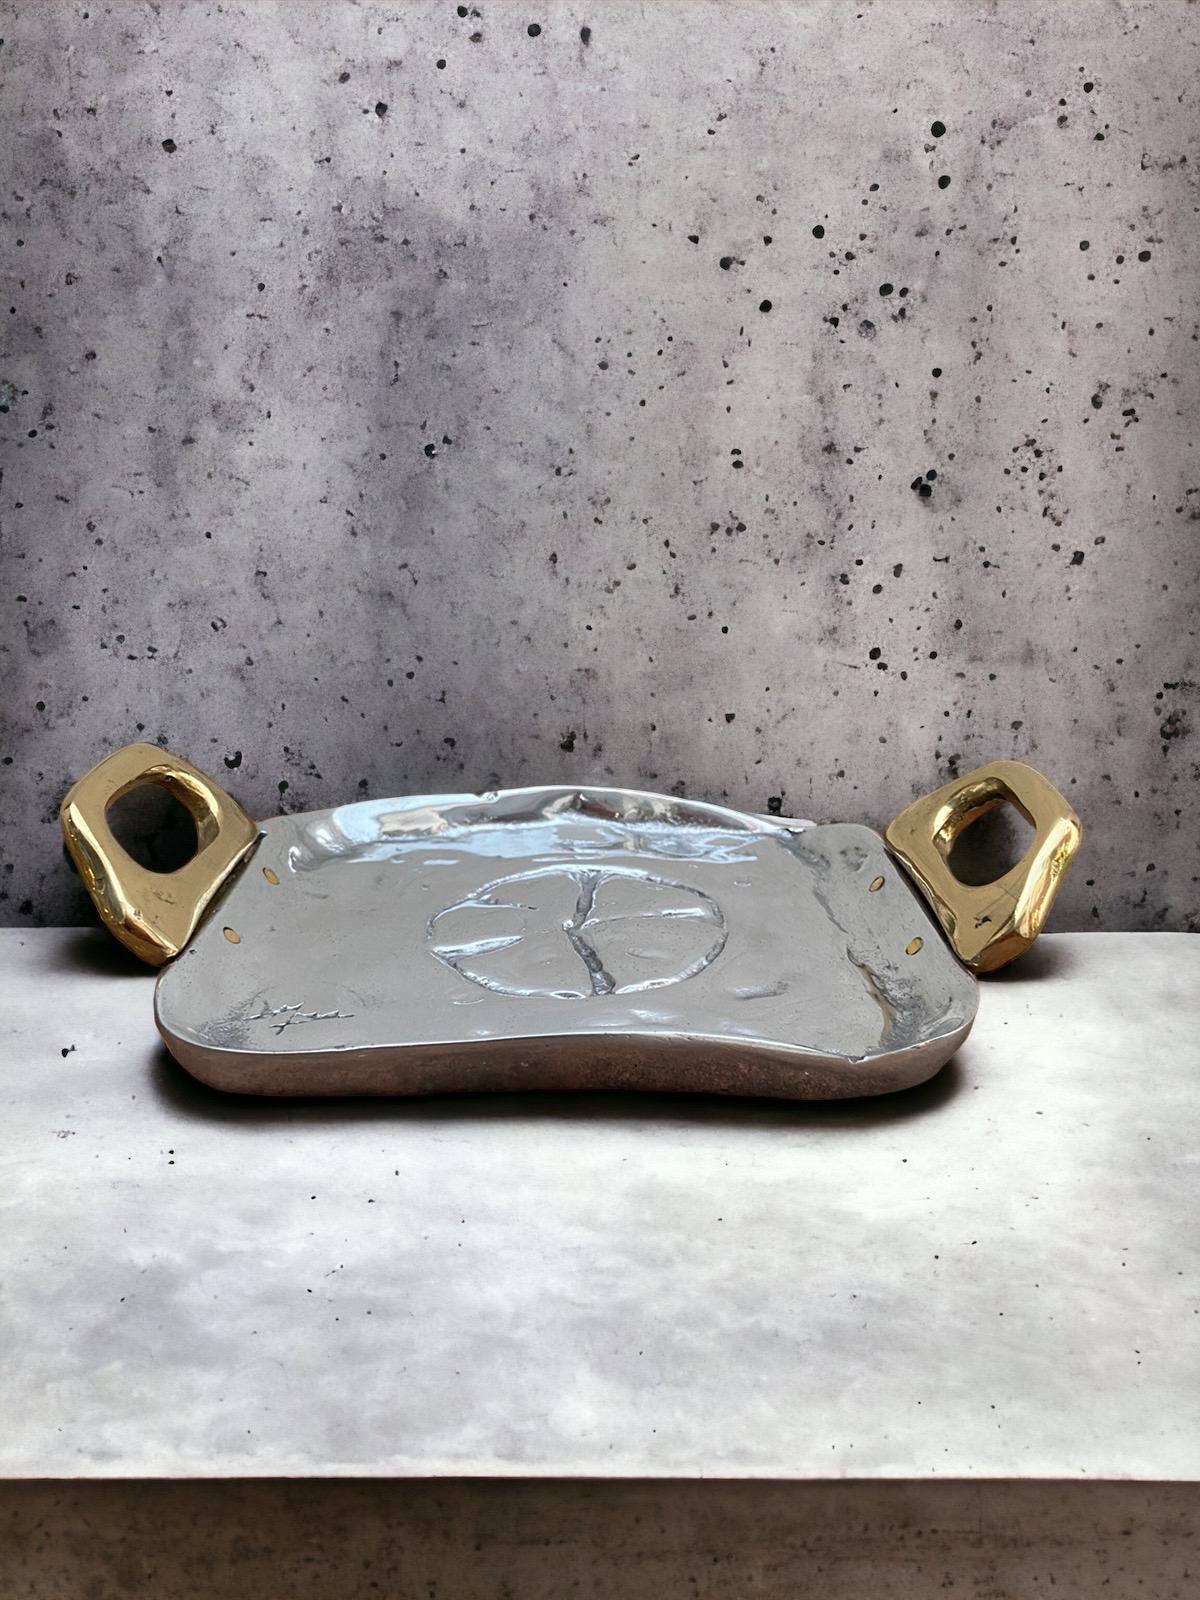 The decorative Celtic Card Tray was created by David Marshall, it is made of sand cast aluminum and sand cast brass.Makes a beautiful Wedding or Company Gift.
Handmade, mounted and finished in our foundry and workshop in Spain from recycled